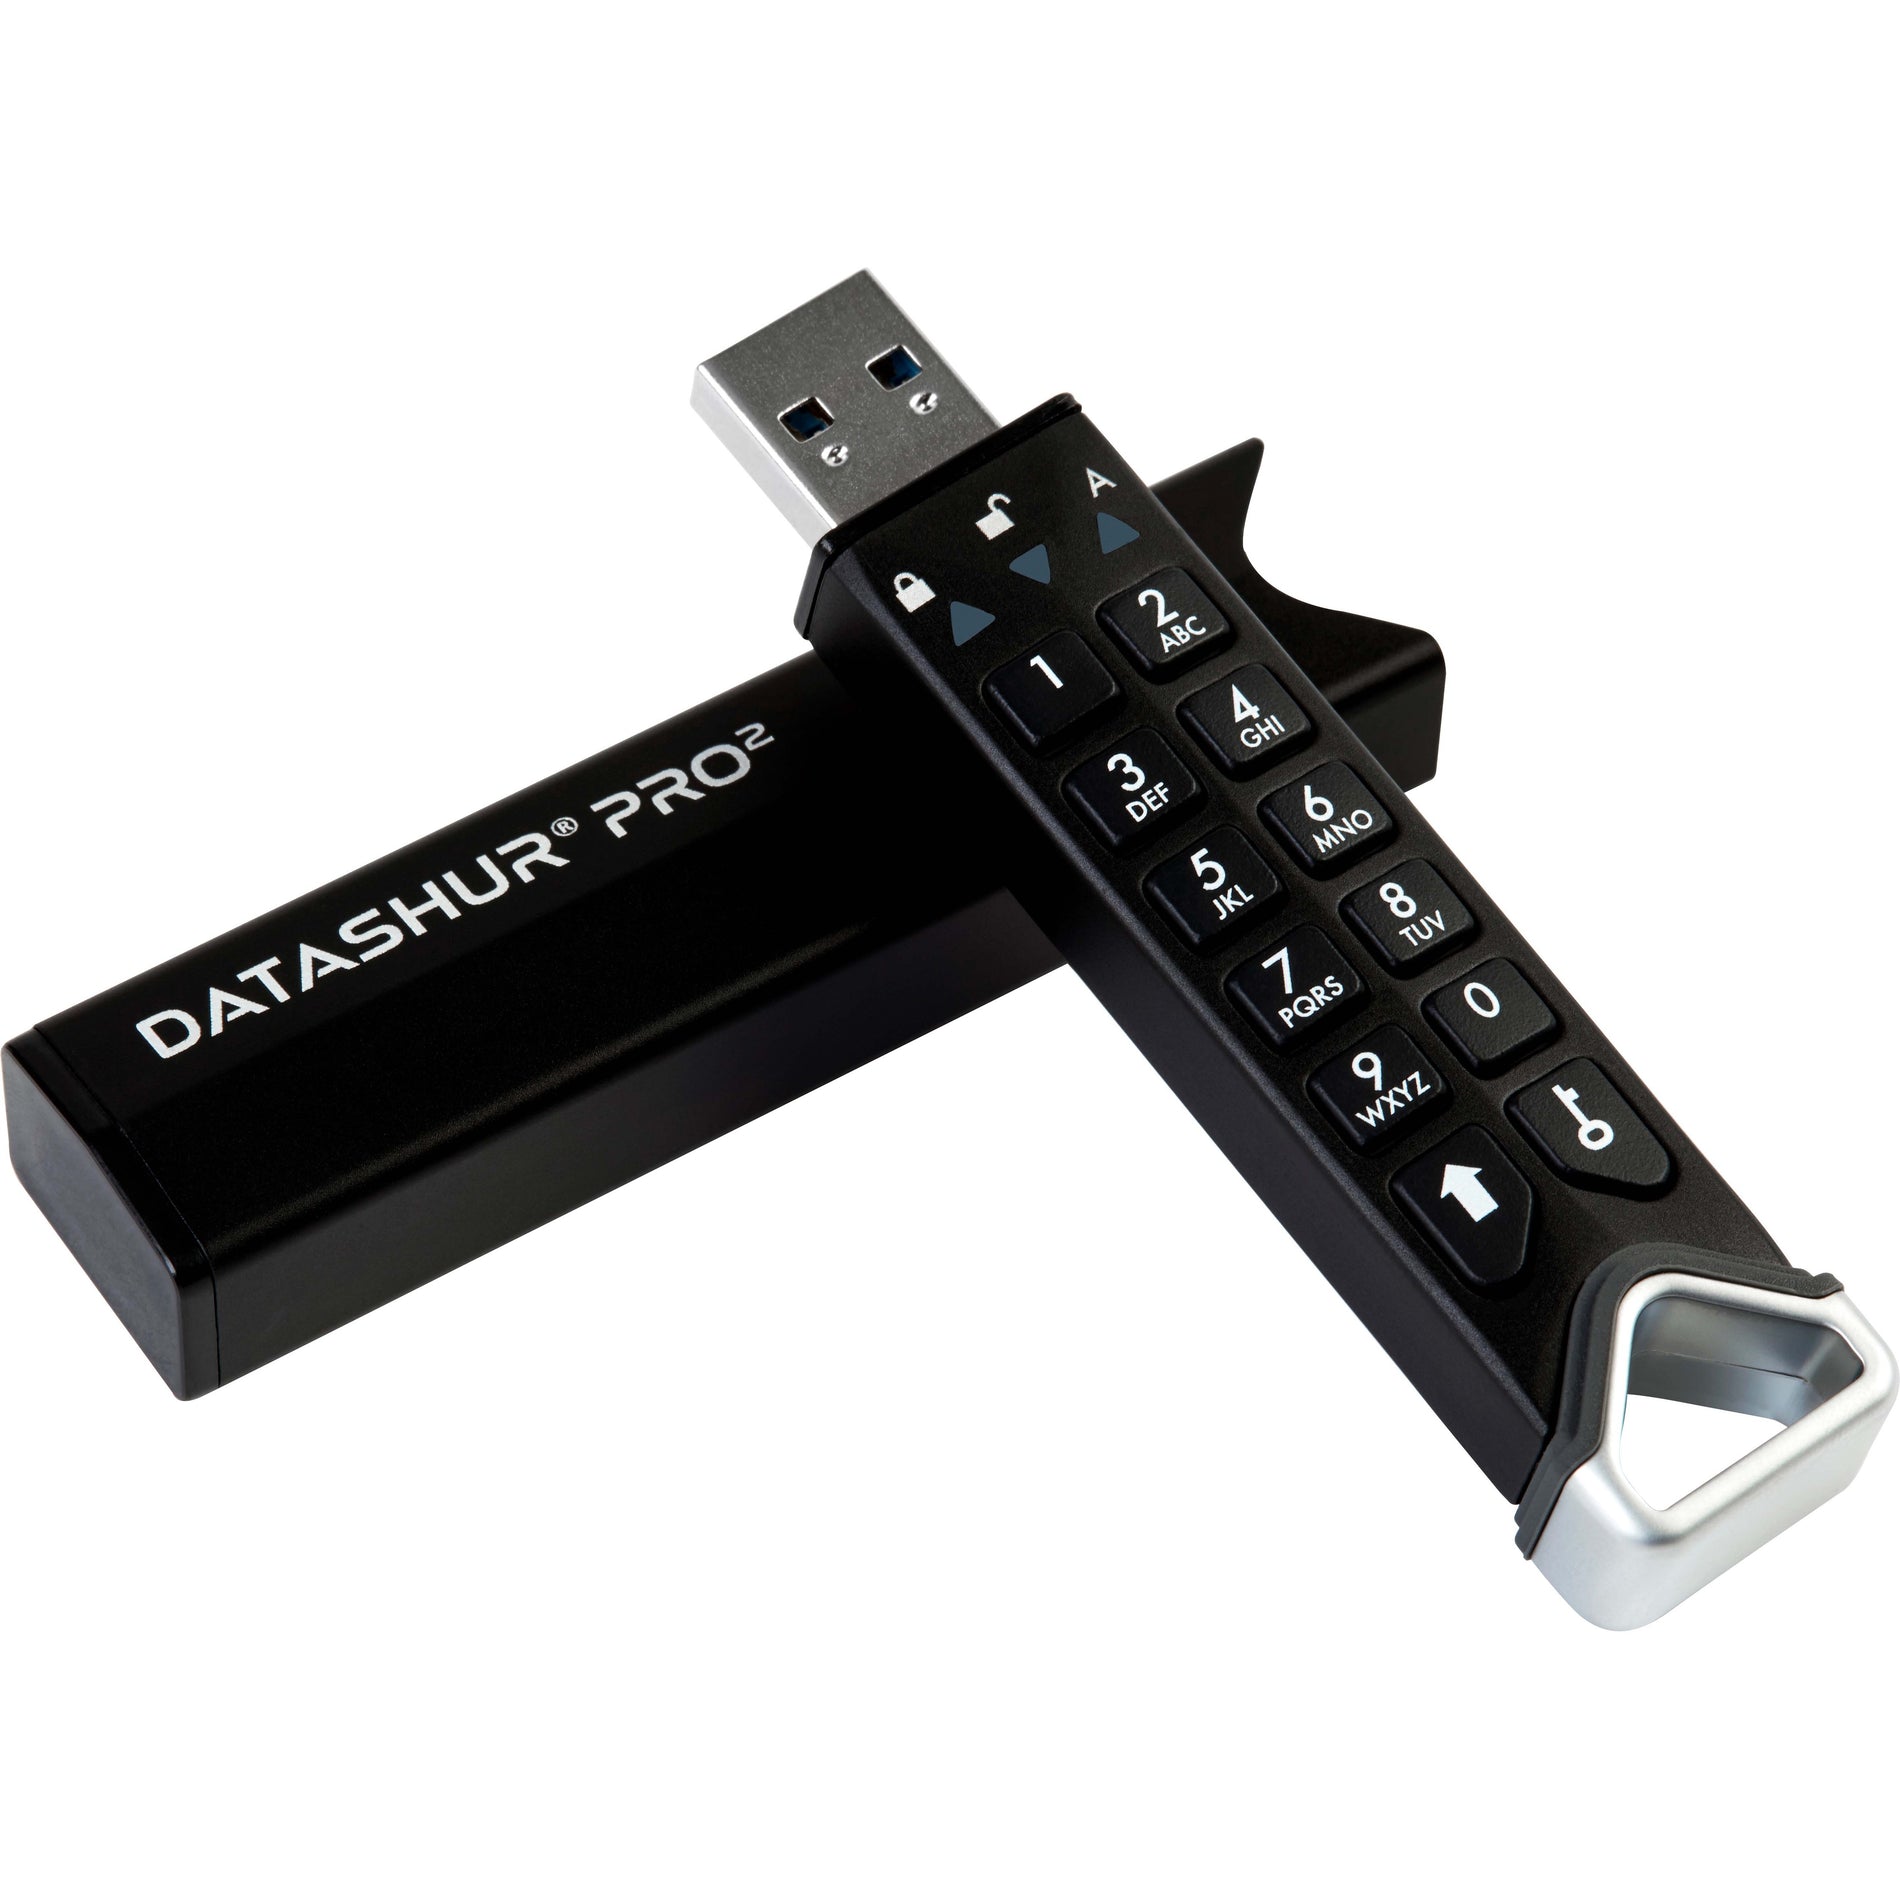 iStorage IS-FL-DP2-256-256 datAshur PRO² 256GB USB 3.2 (Gen 1) Type A Flash Drive, Secure, FIPS 140-2 Level 3 Certified, Password Protected, Dust/Water-Resistant